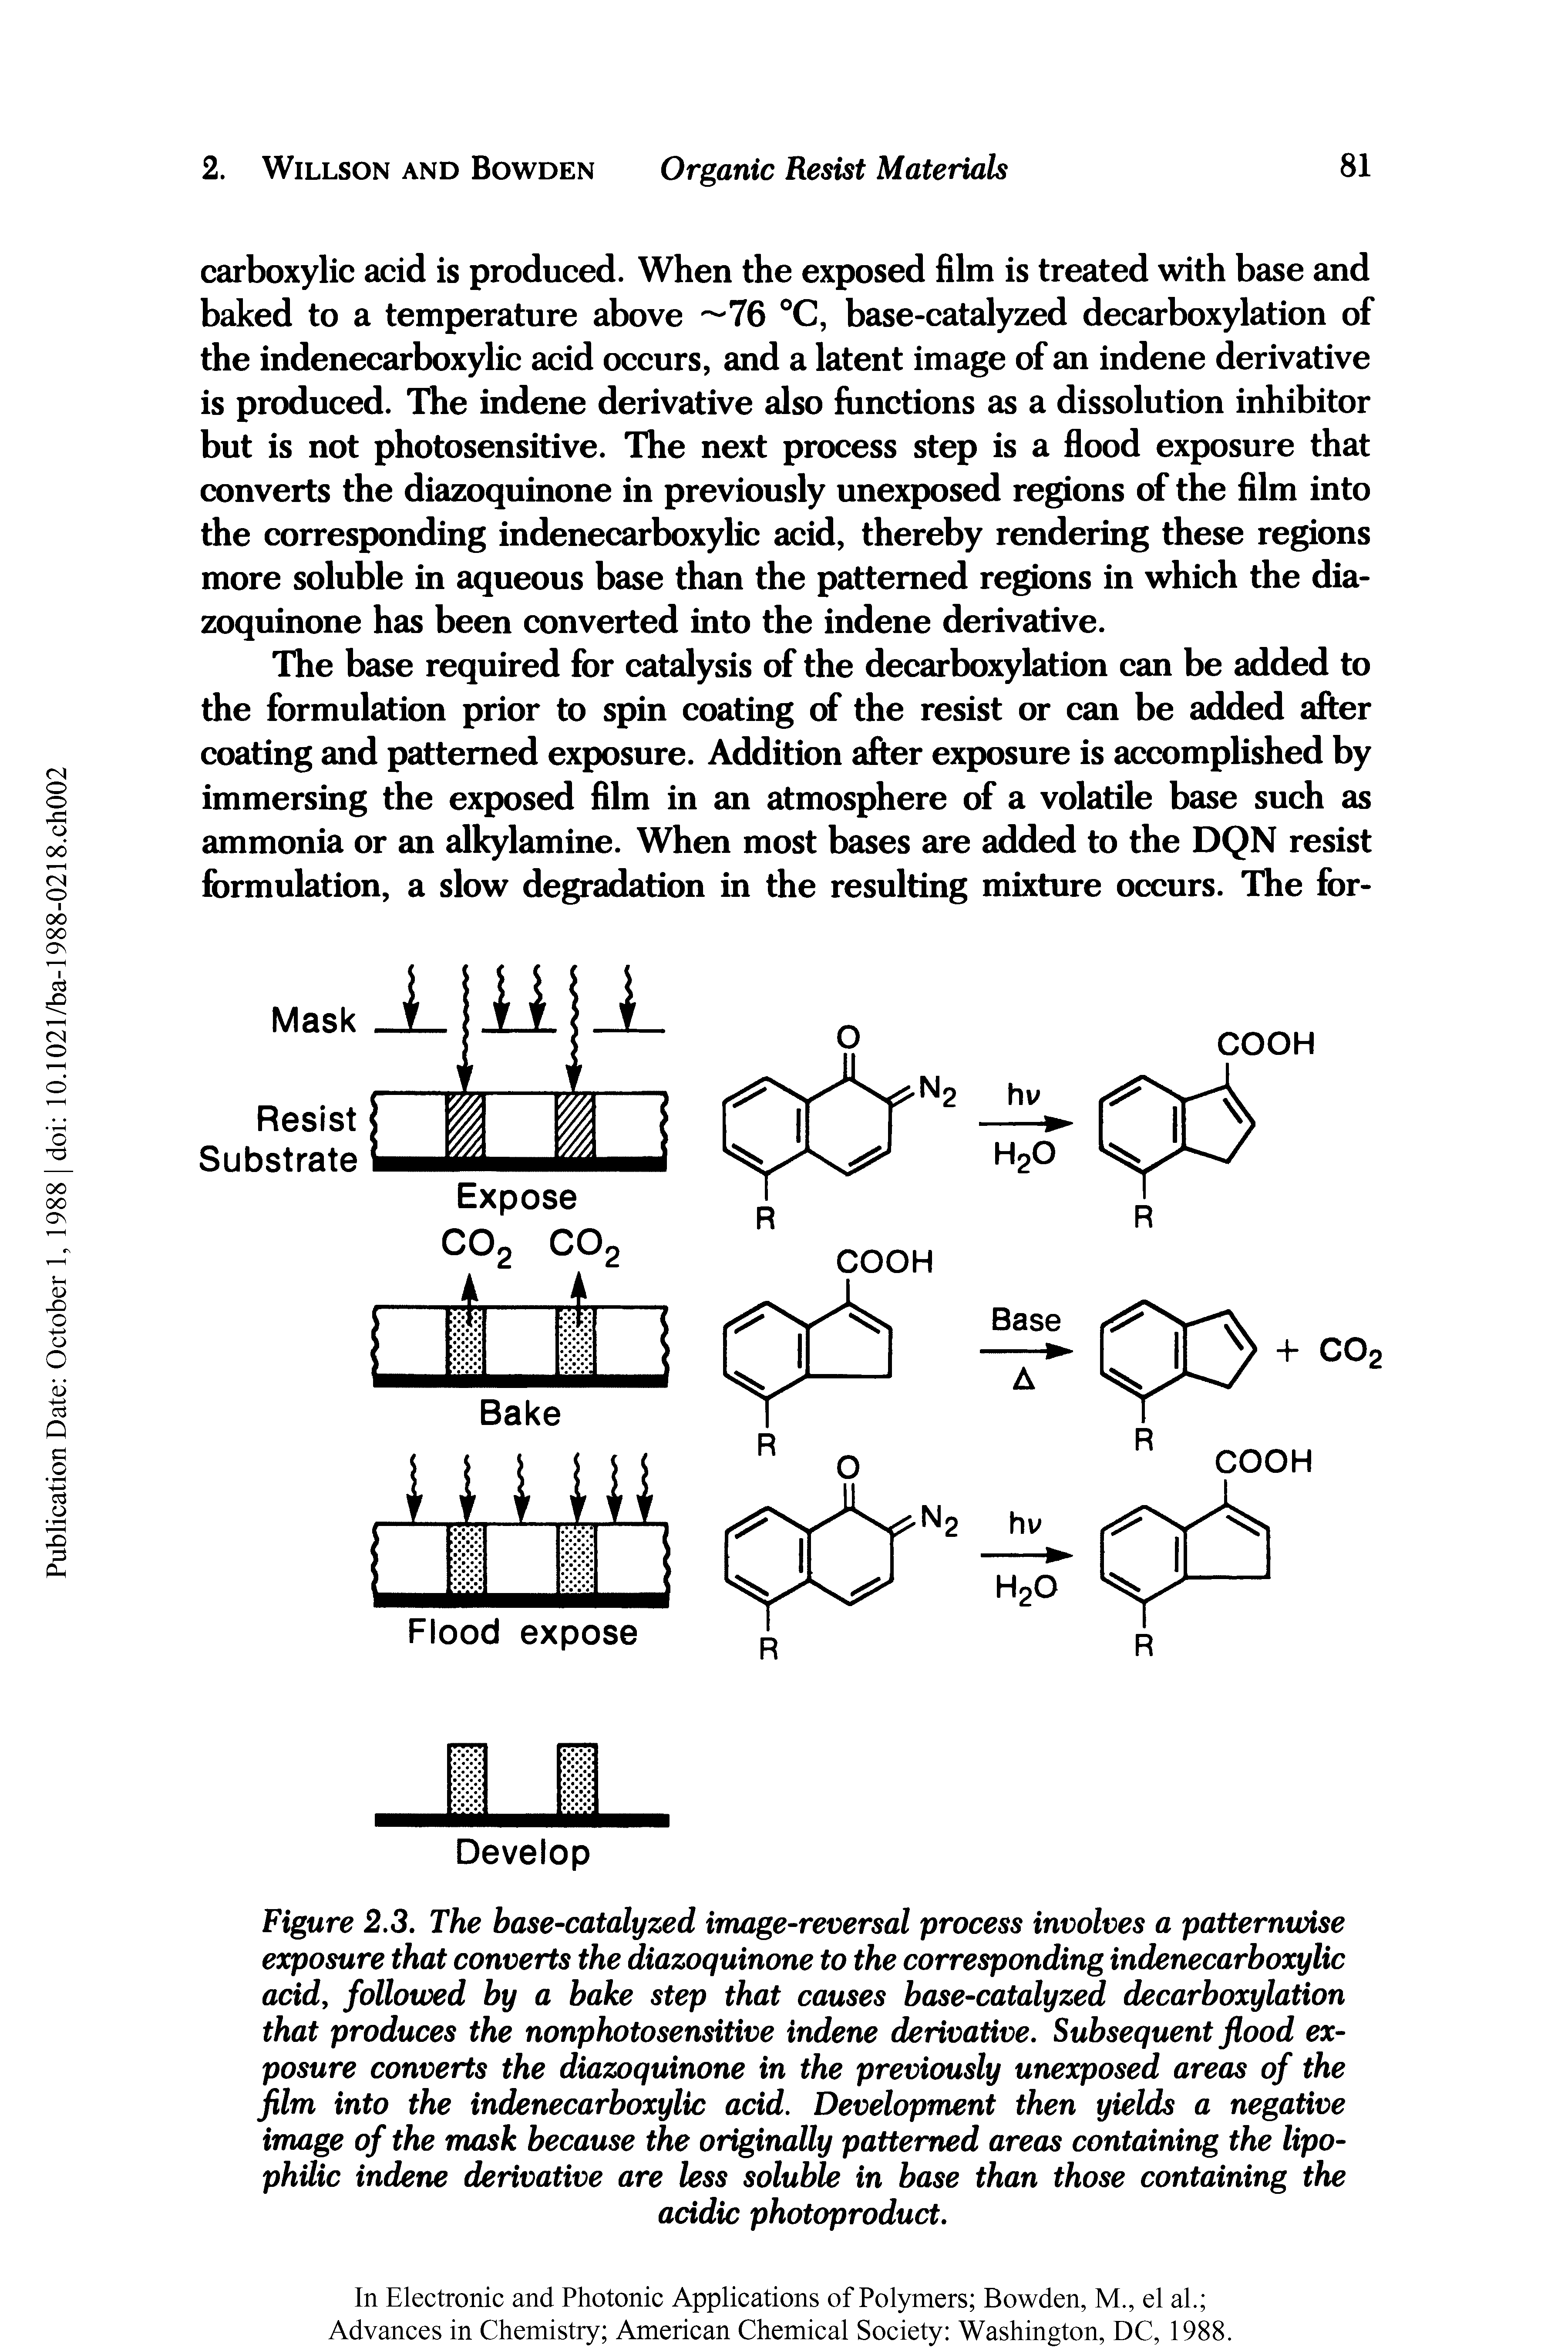 Figure 2.3. The base-catalyzed image-reversal process involves a patternwise exposure that converts the diazoquinone to the corresponding indenecarboxylic acid, follotved by a bake step that causes base-catalyzed decarboxylation that produces the nonphotosensitive indene derivative. Subsequent flood exposure converts the diazoquinone in the previously unexposed areas of the film into the indenecarboxylic acid. Development then yields a negative image of the mask because the originally patterned areas containing the lipophilic indene derivative are less soluble in base than those containing the...